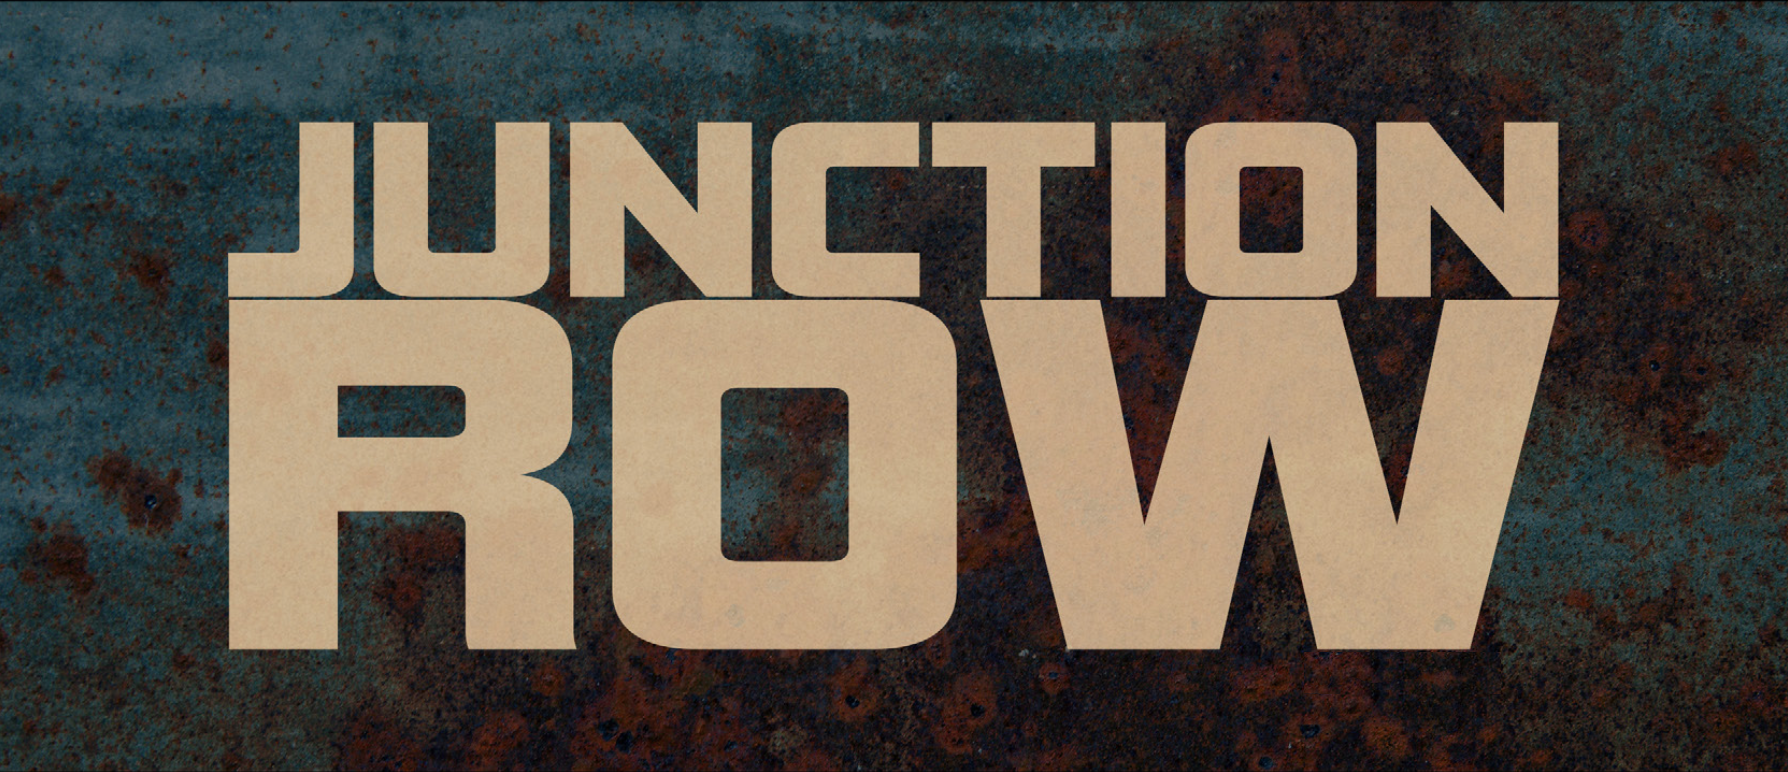 JUNCTION ROW (FEATURE FILM, in post-production)